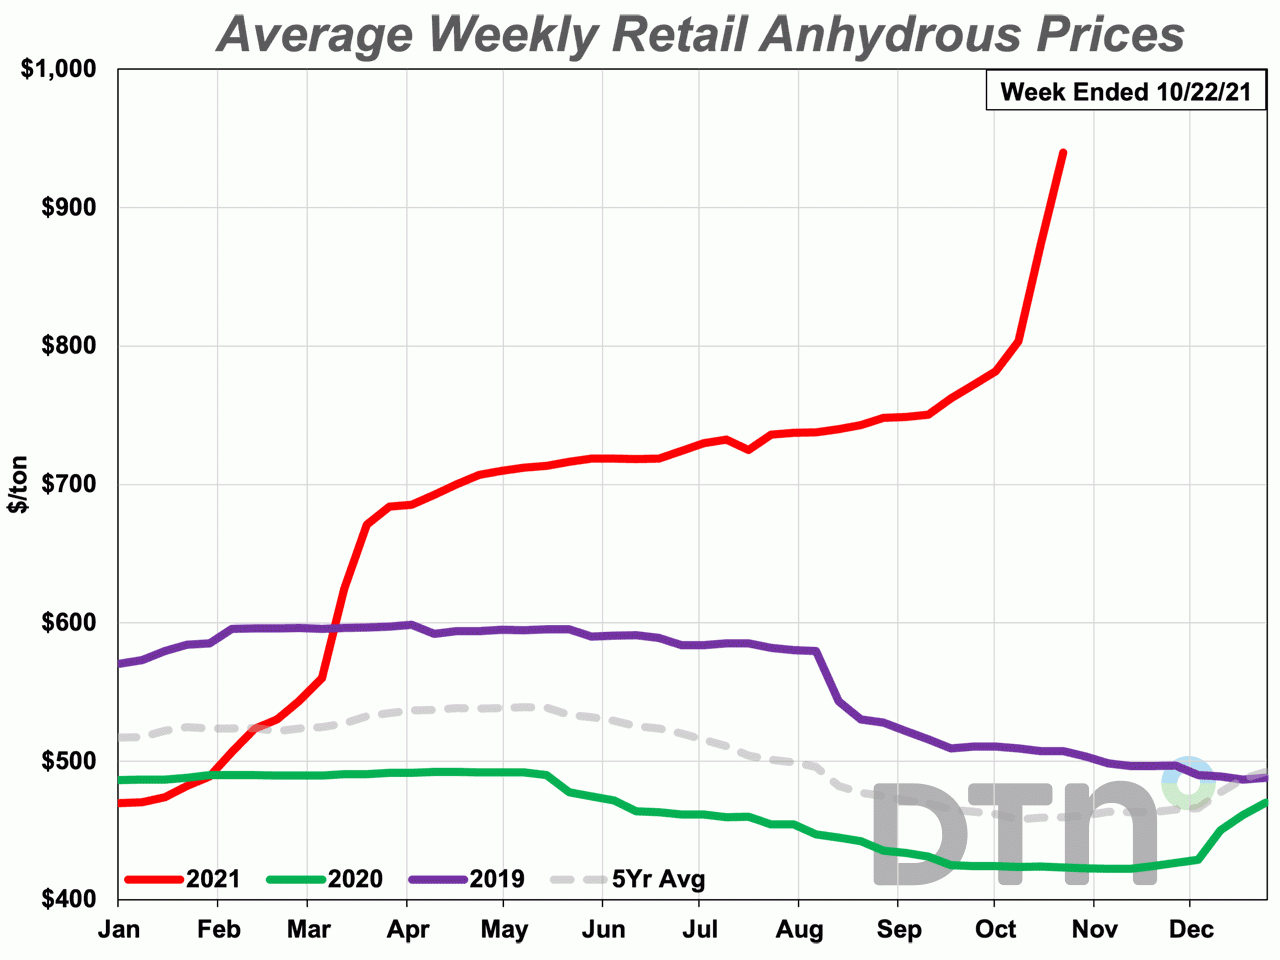 Anhydrous cost a farmer $940 per ton on average during the third week of October, a 22% increase in the past month. The nitrogen fertilizer is now 122% more expensive than last year. (DTN chart)